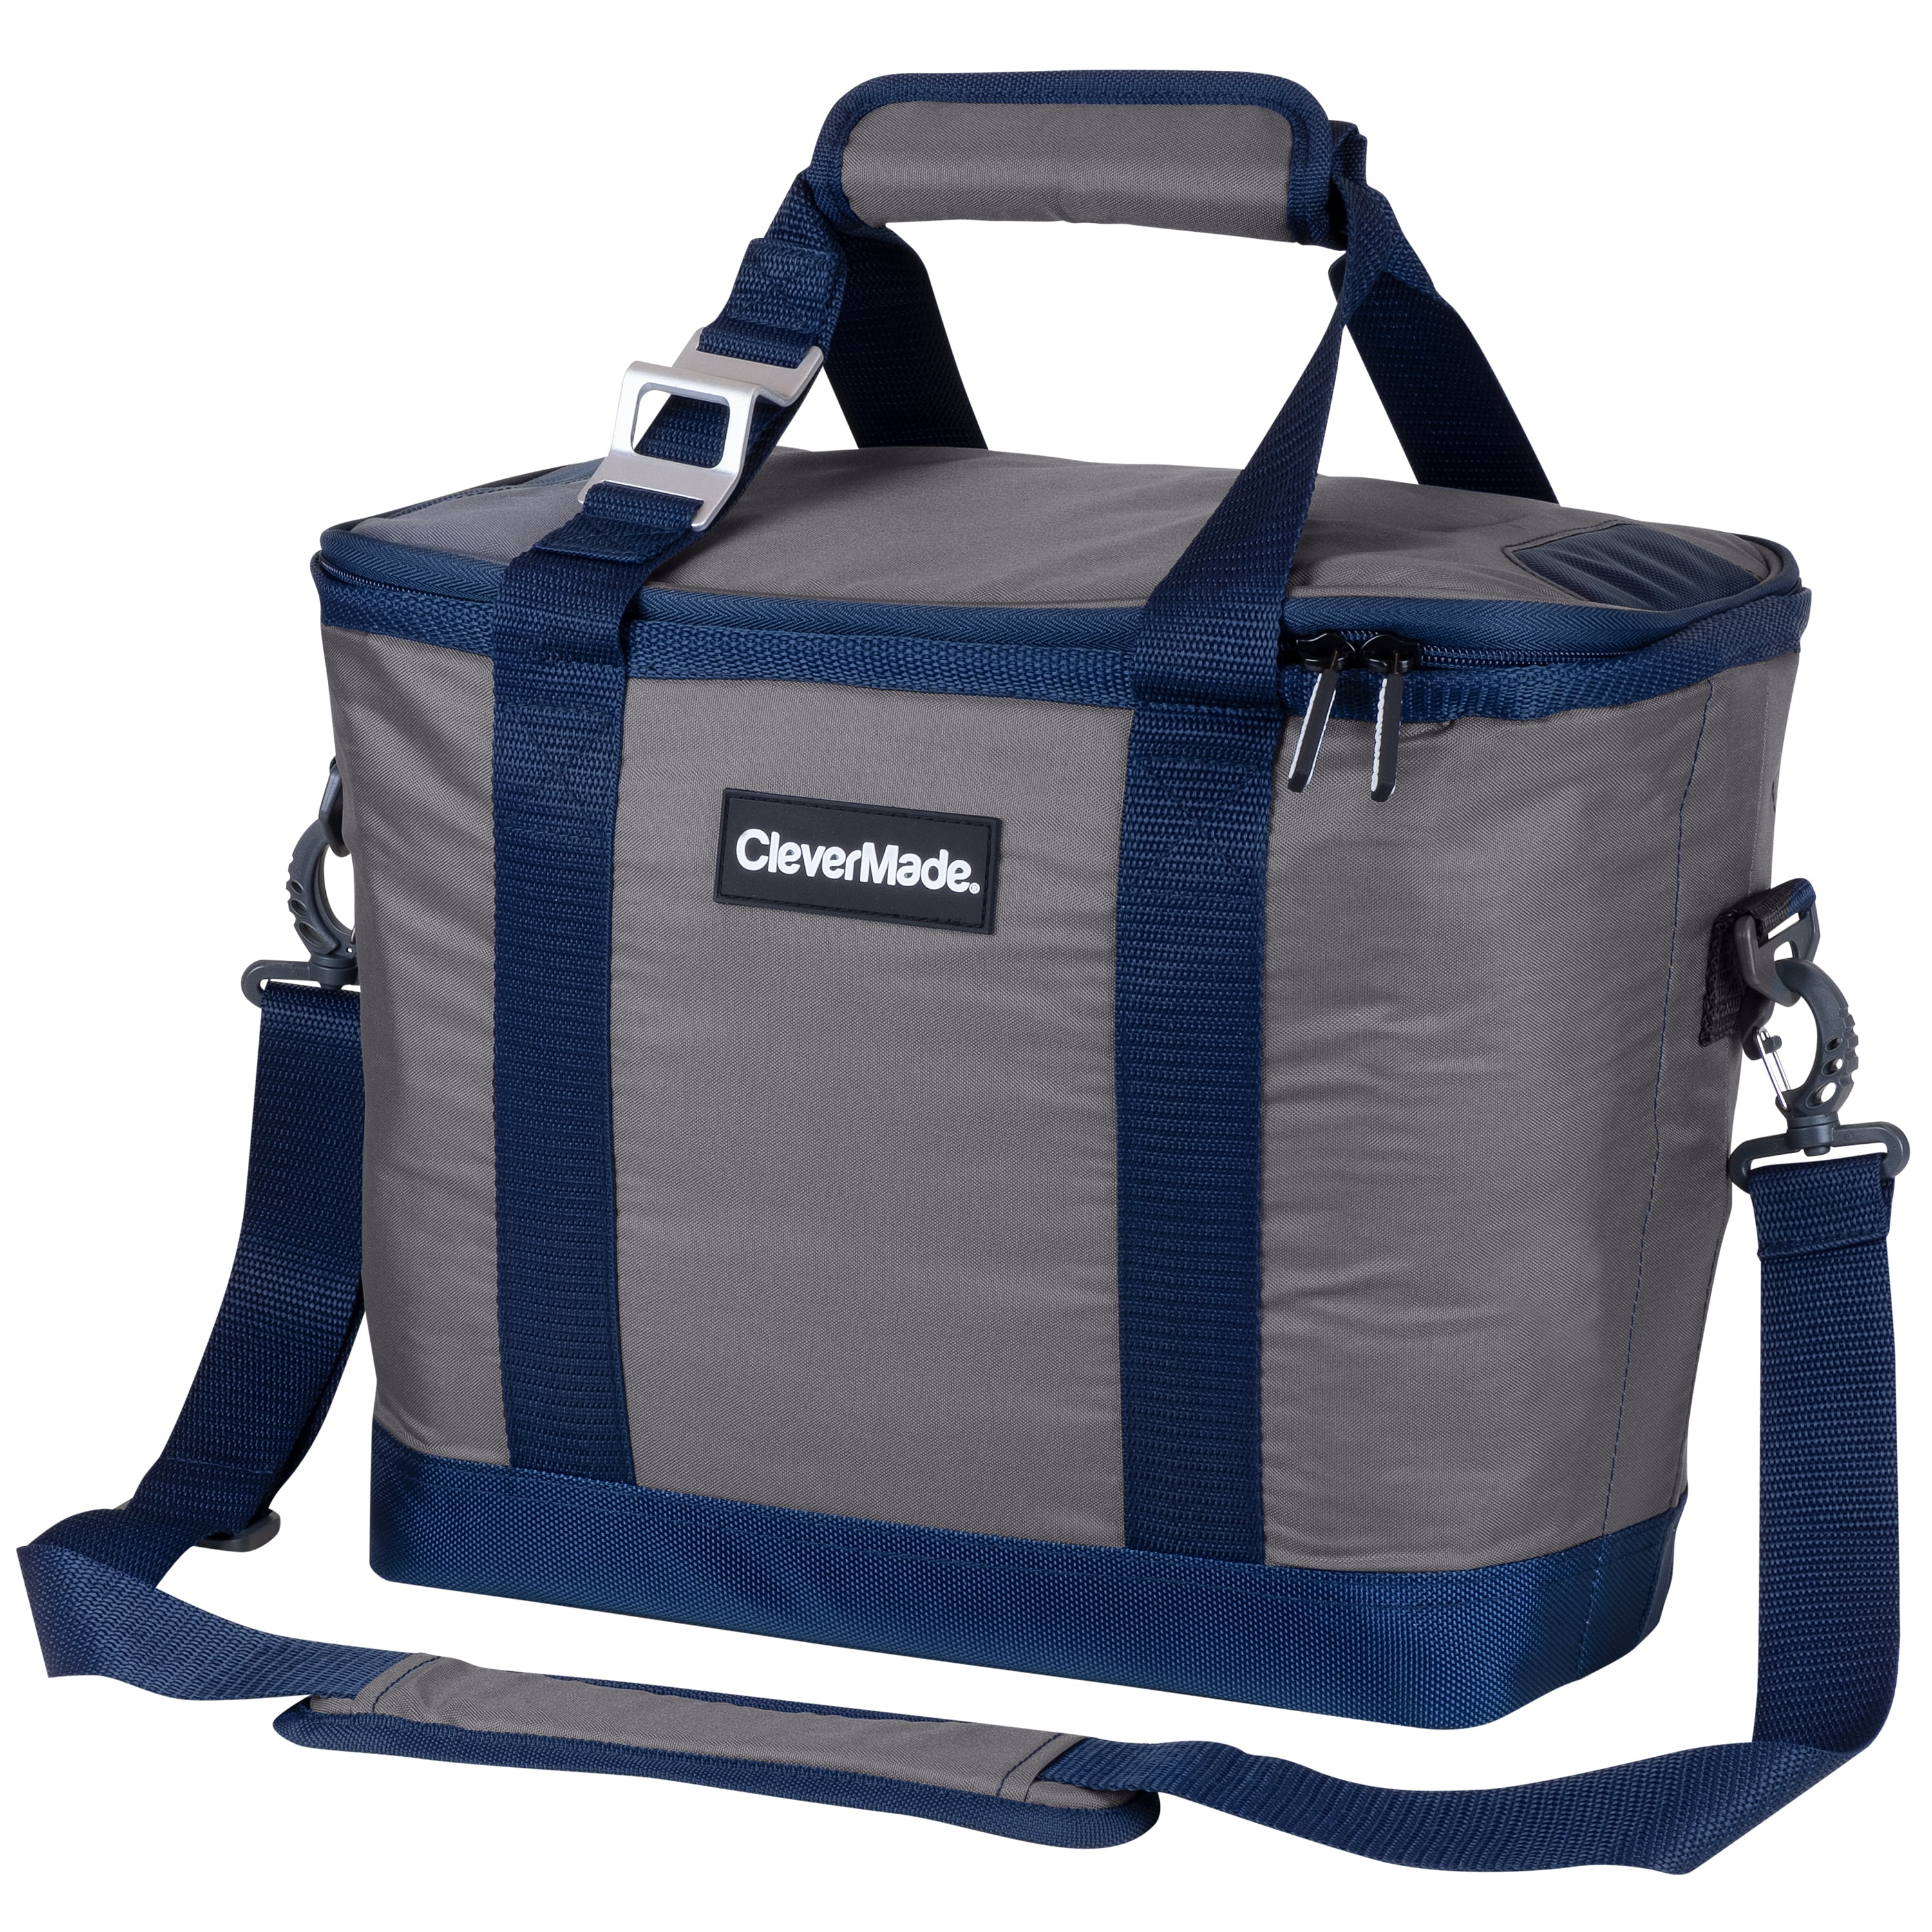 CleverMade 30 Can Collapsible Cooler, Grey/Navy